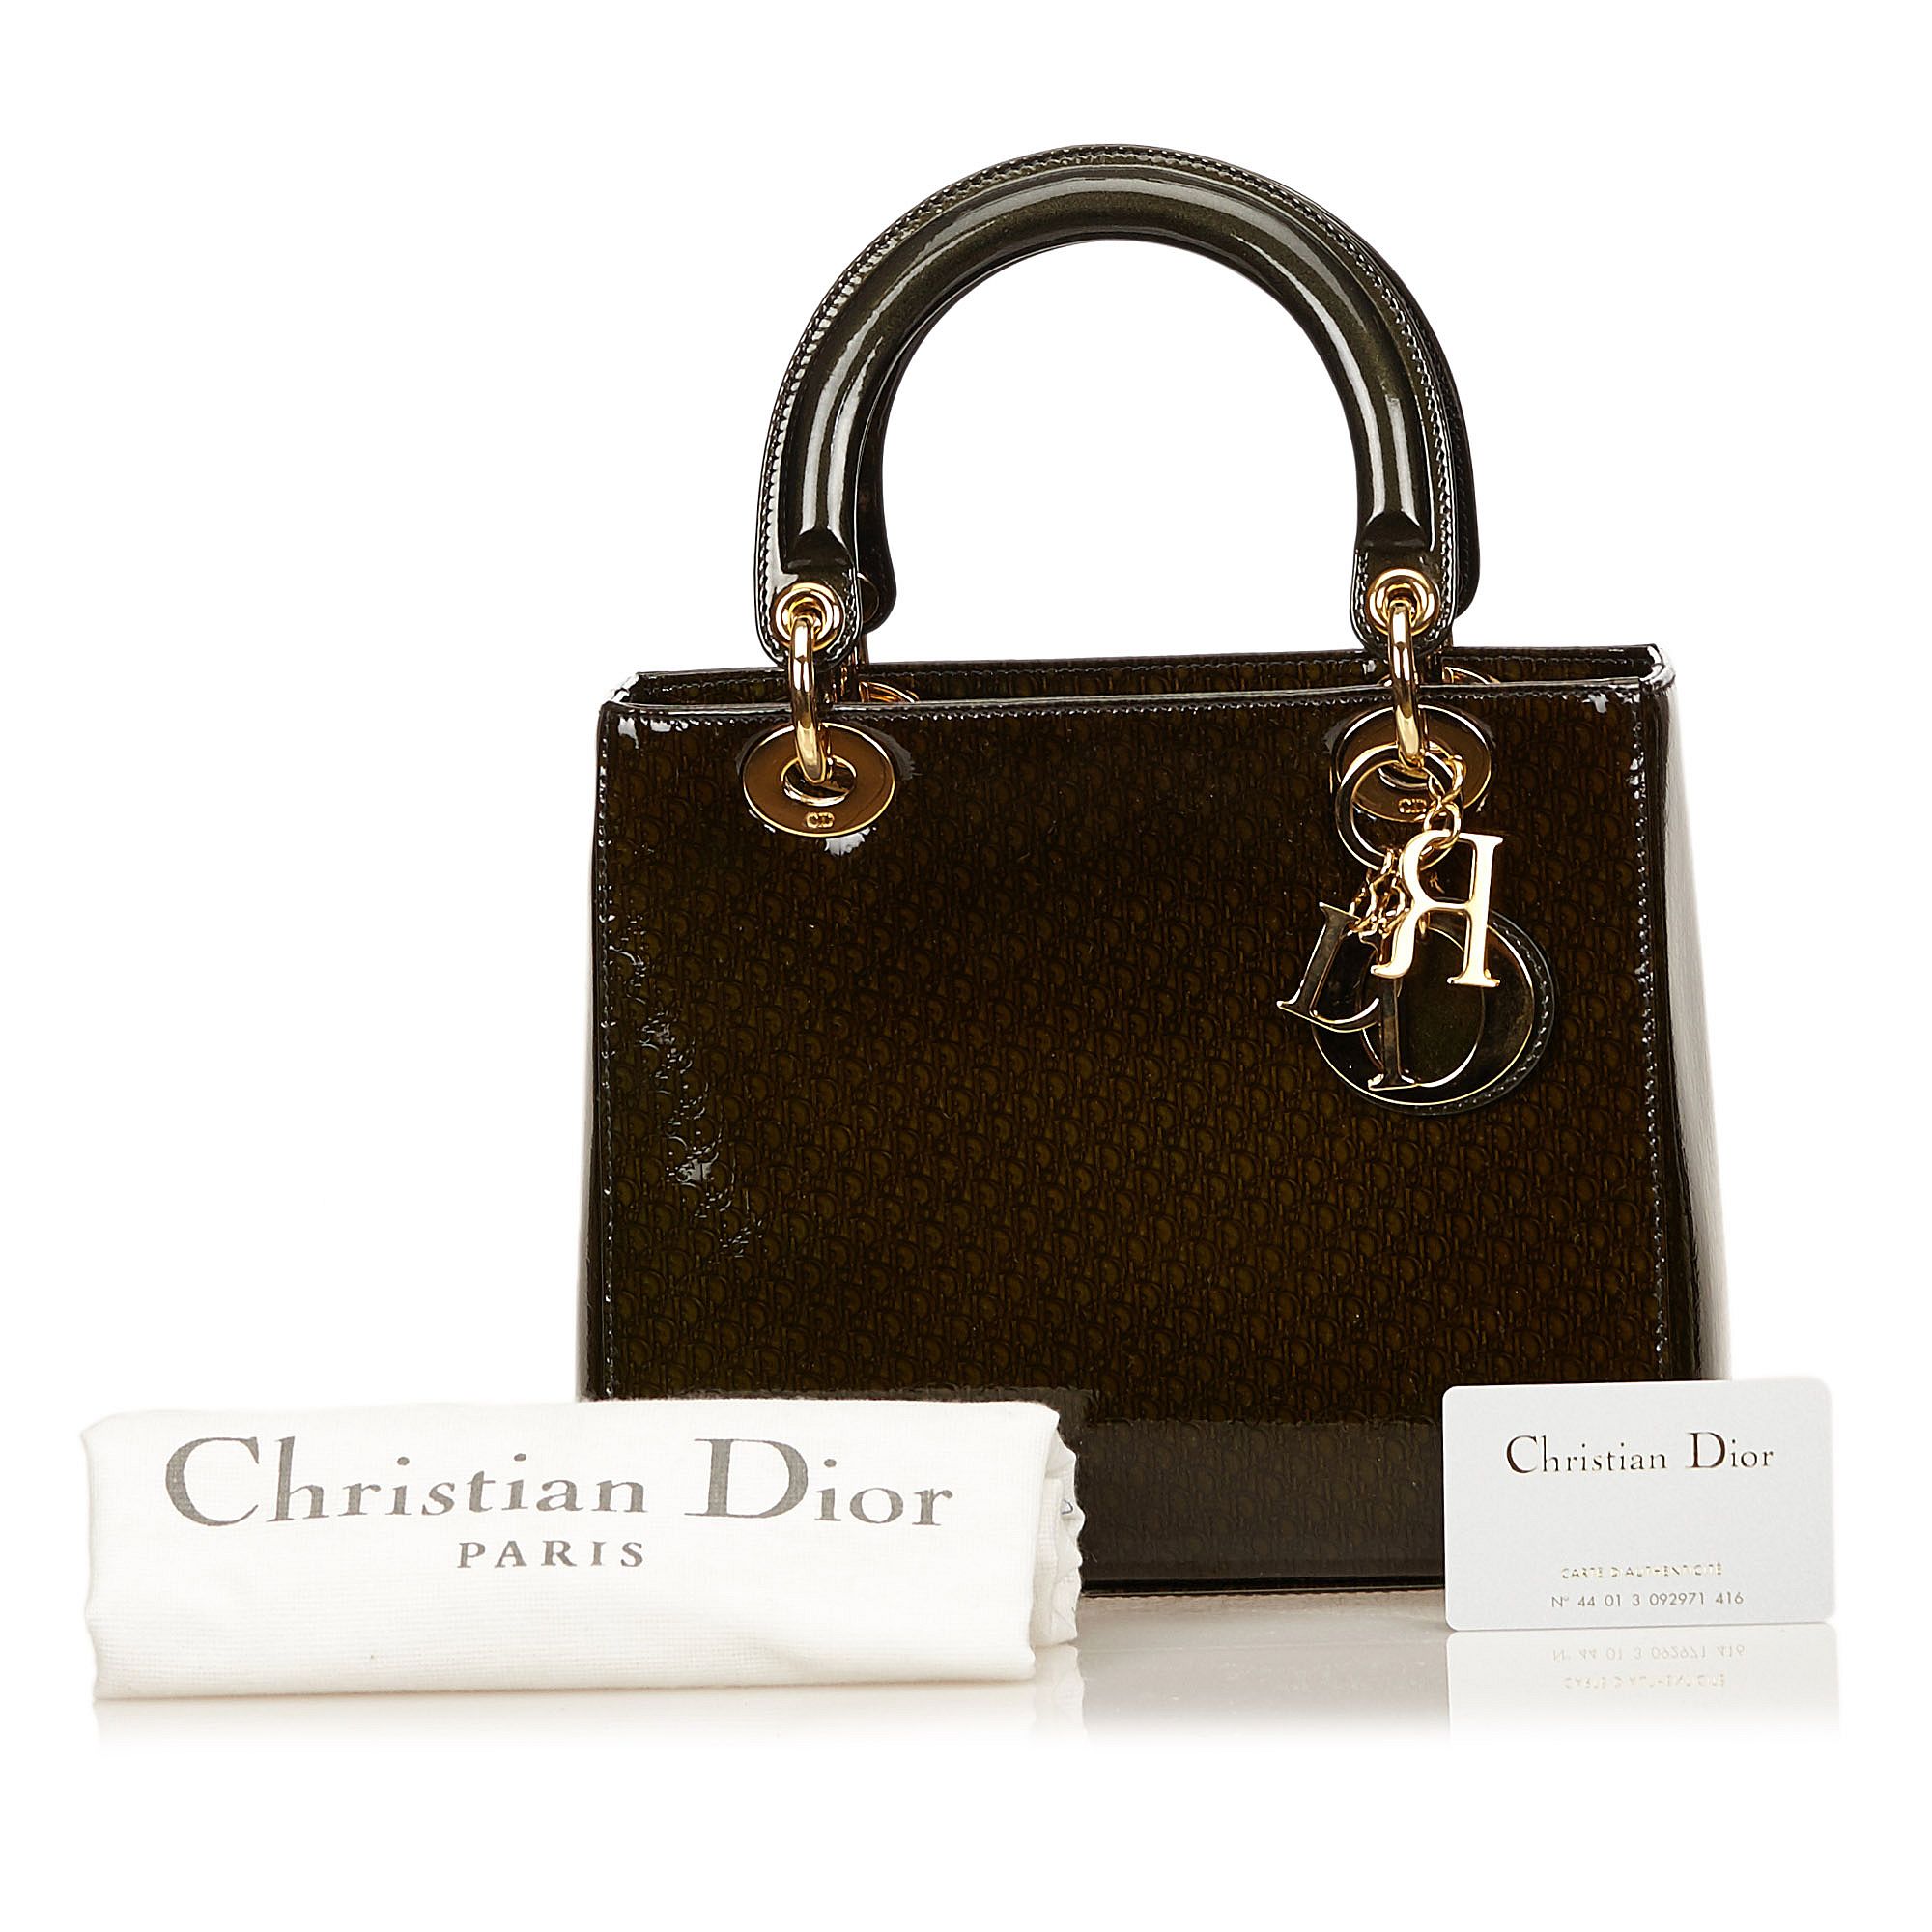 CHRISTIAN DIOR LADY DIOR HANDBAG, black patent Diorissimo leather, 24cm wide, 20cm high, with dust - Image 12 of 12